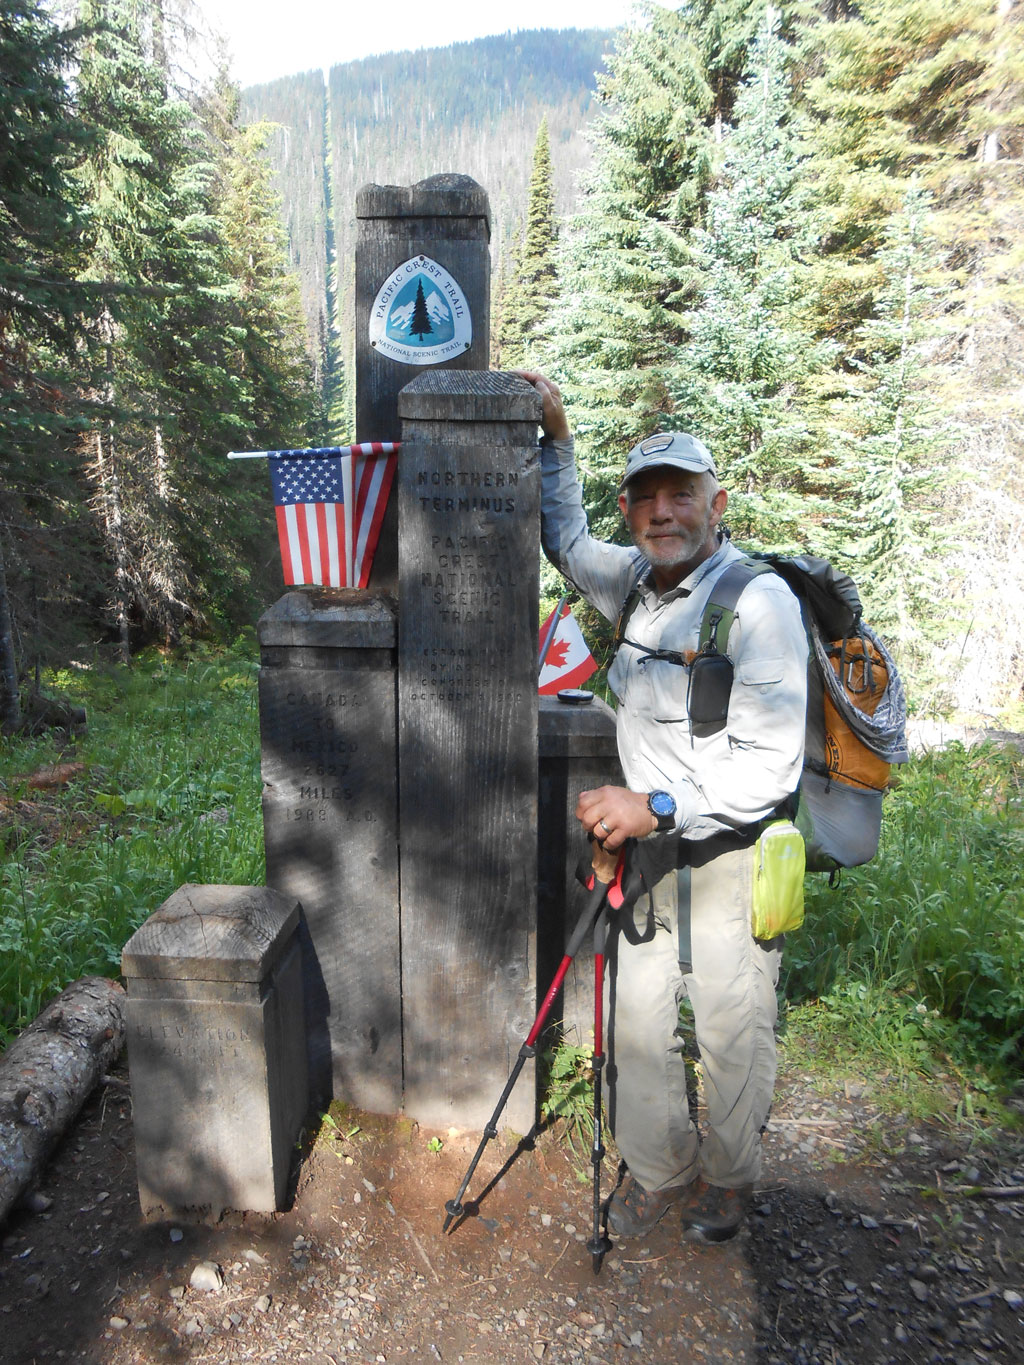 At the northern terminus of the Pacific Crest Trail.